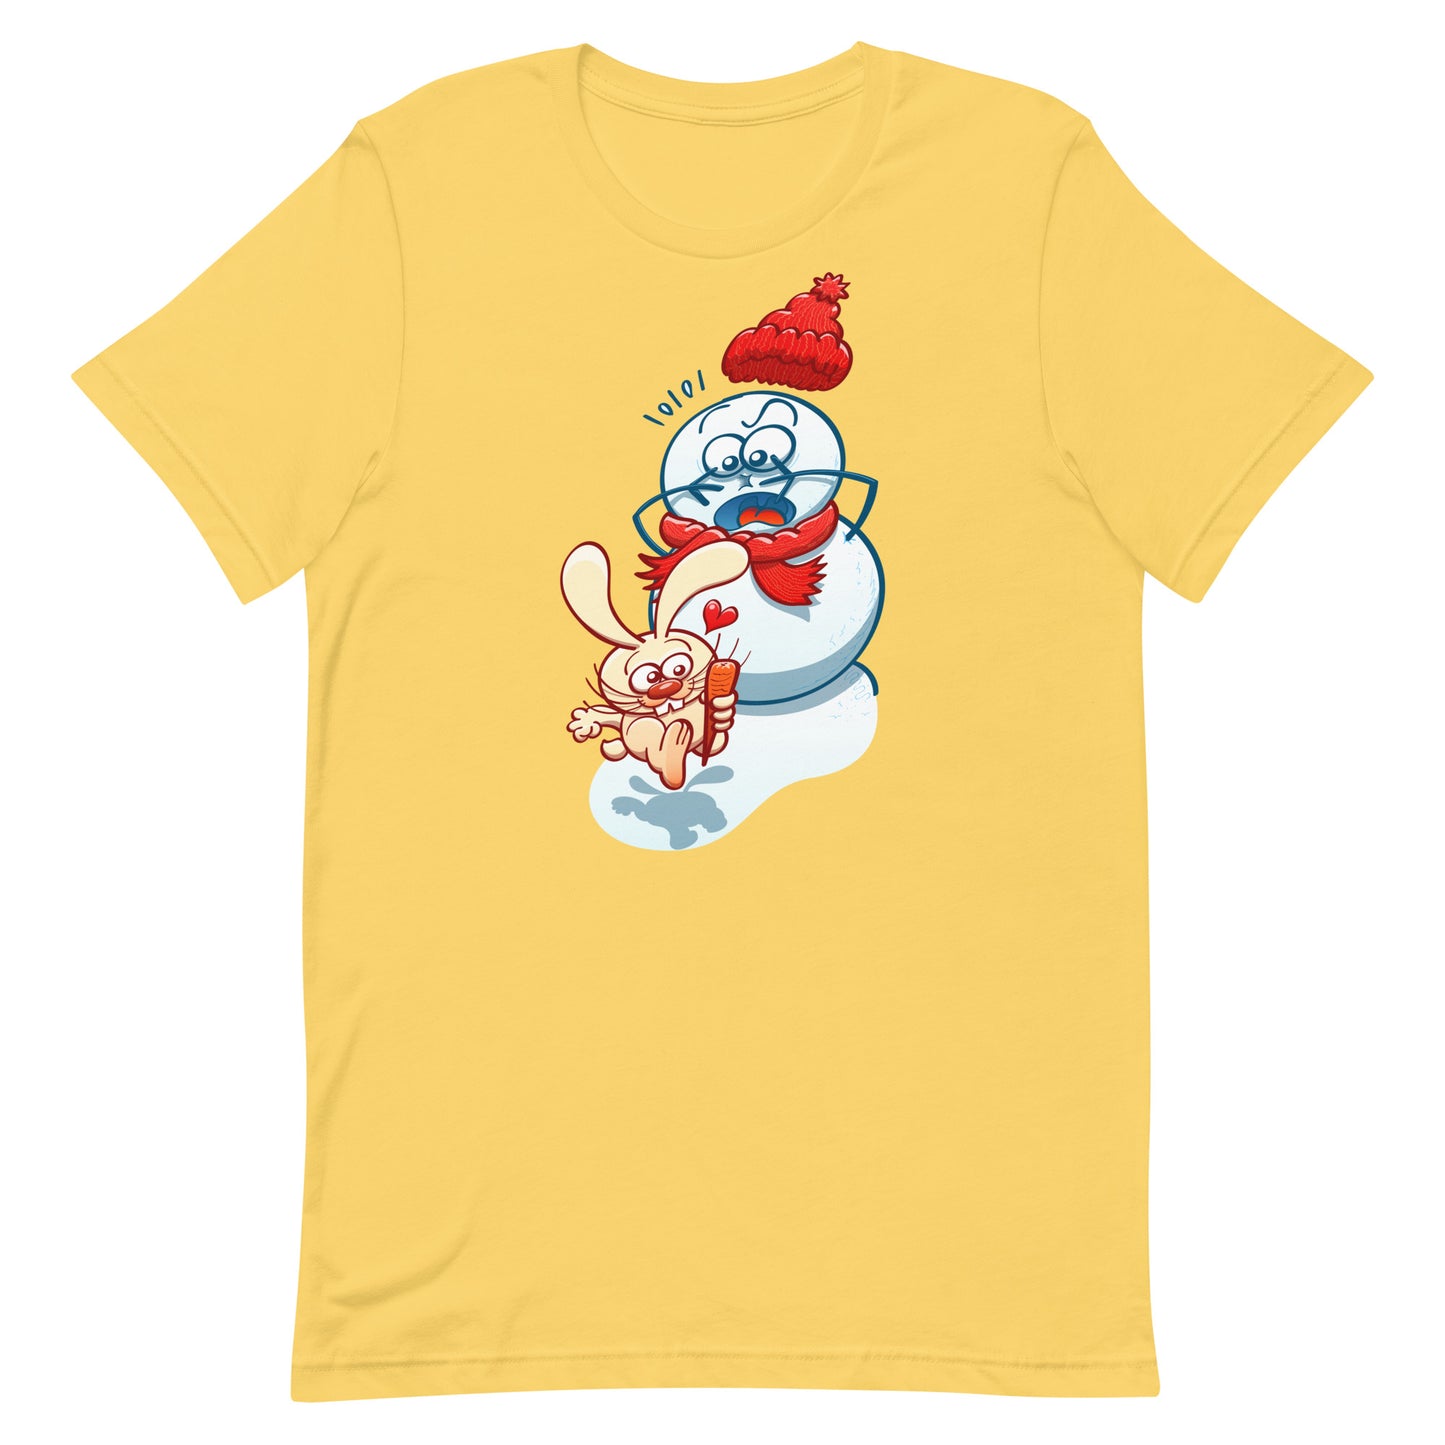 Snowman's Nose Heist: A Christmas Love Tale - Unisex t-shirt. Yellow. Front view